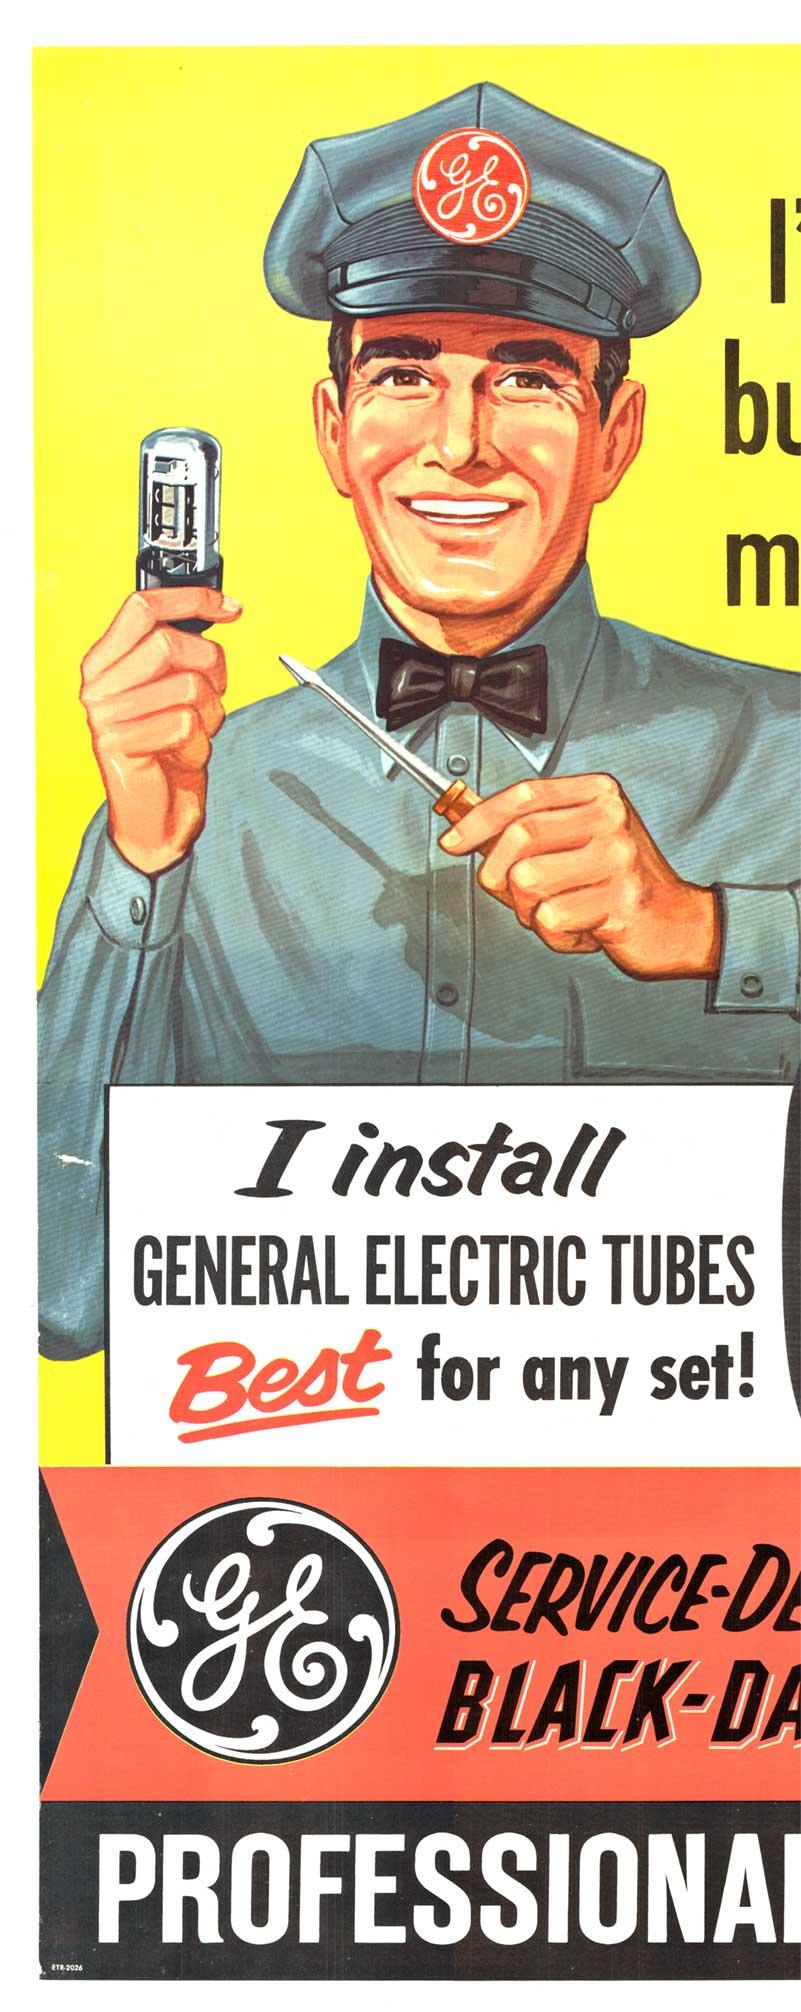 
Original General Electric Professional TV Service midcentury modern vintage poster.
“I’m no artist, but I know what makes the best picture.”   I install General Electric Tubes, Best for any set!   Service-designed Black-Daylite picture tubes.

In